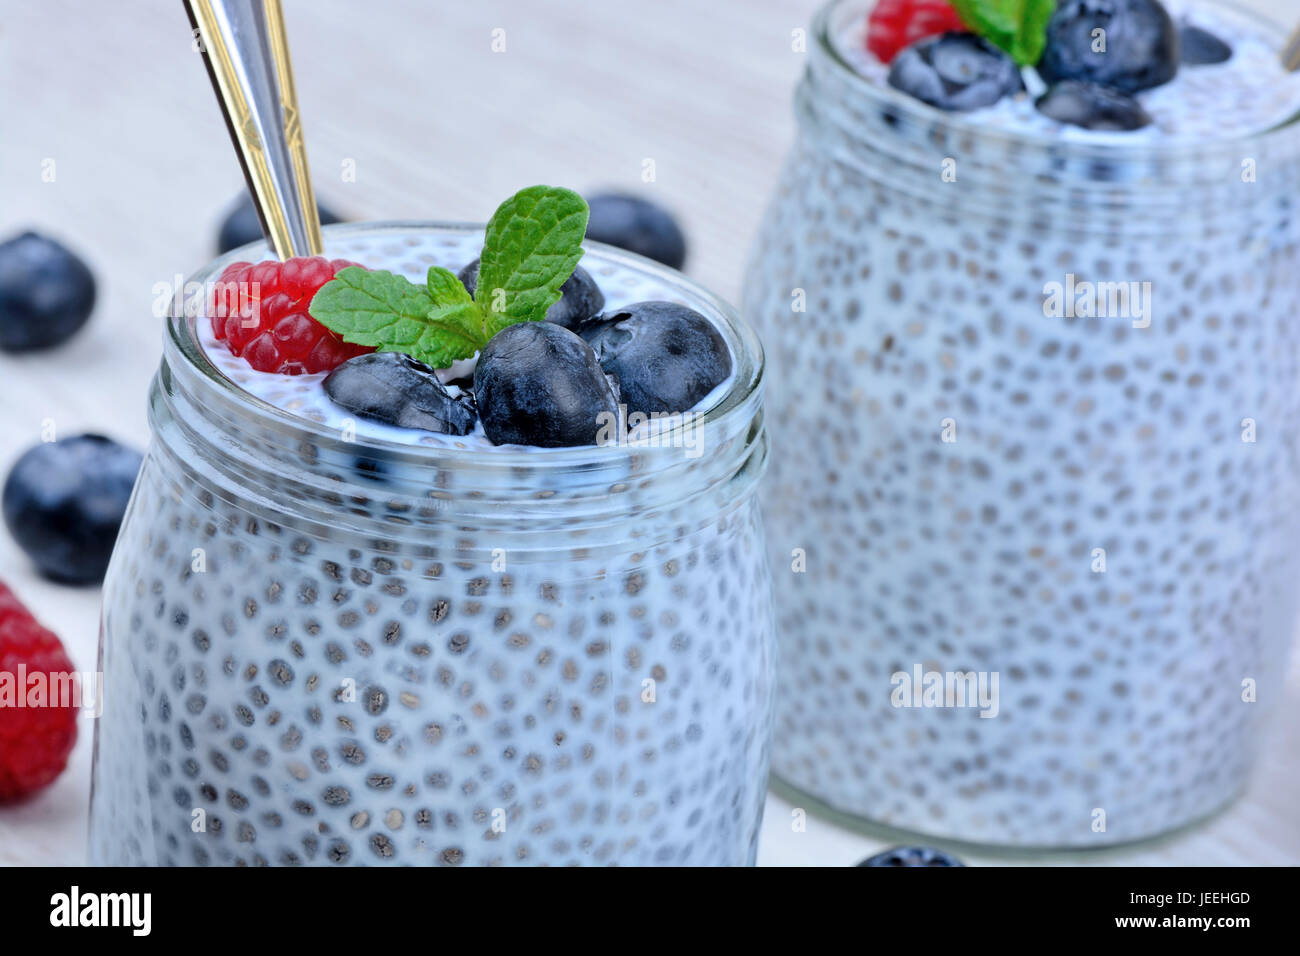 Jar with chia seeds and berries on wooden table close-up Stock Photo